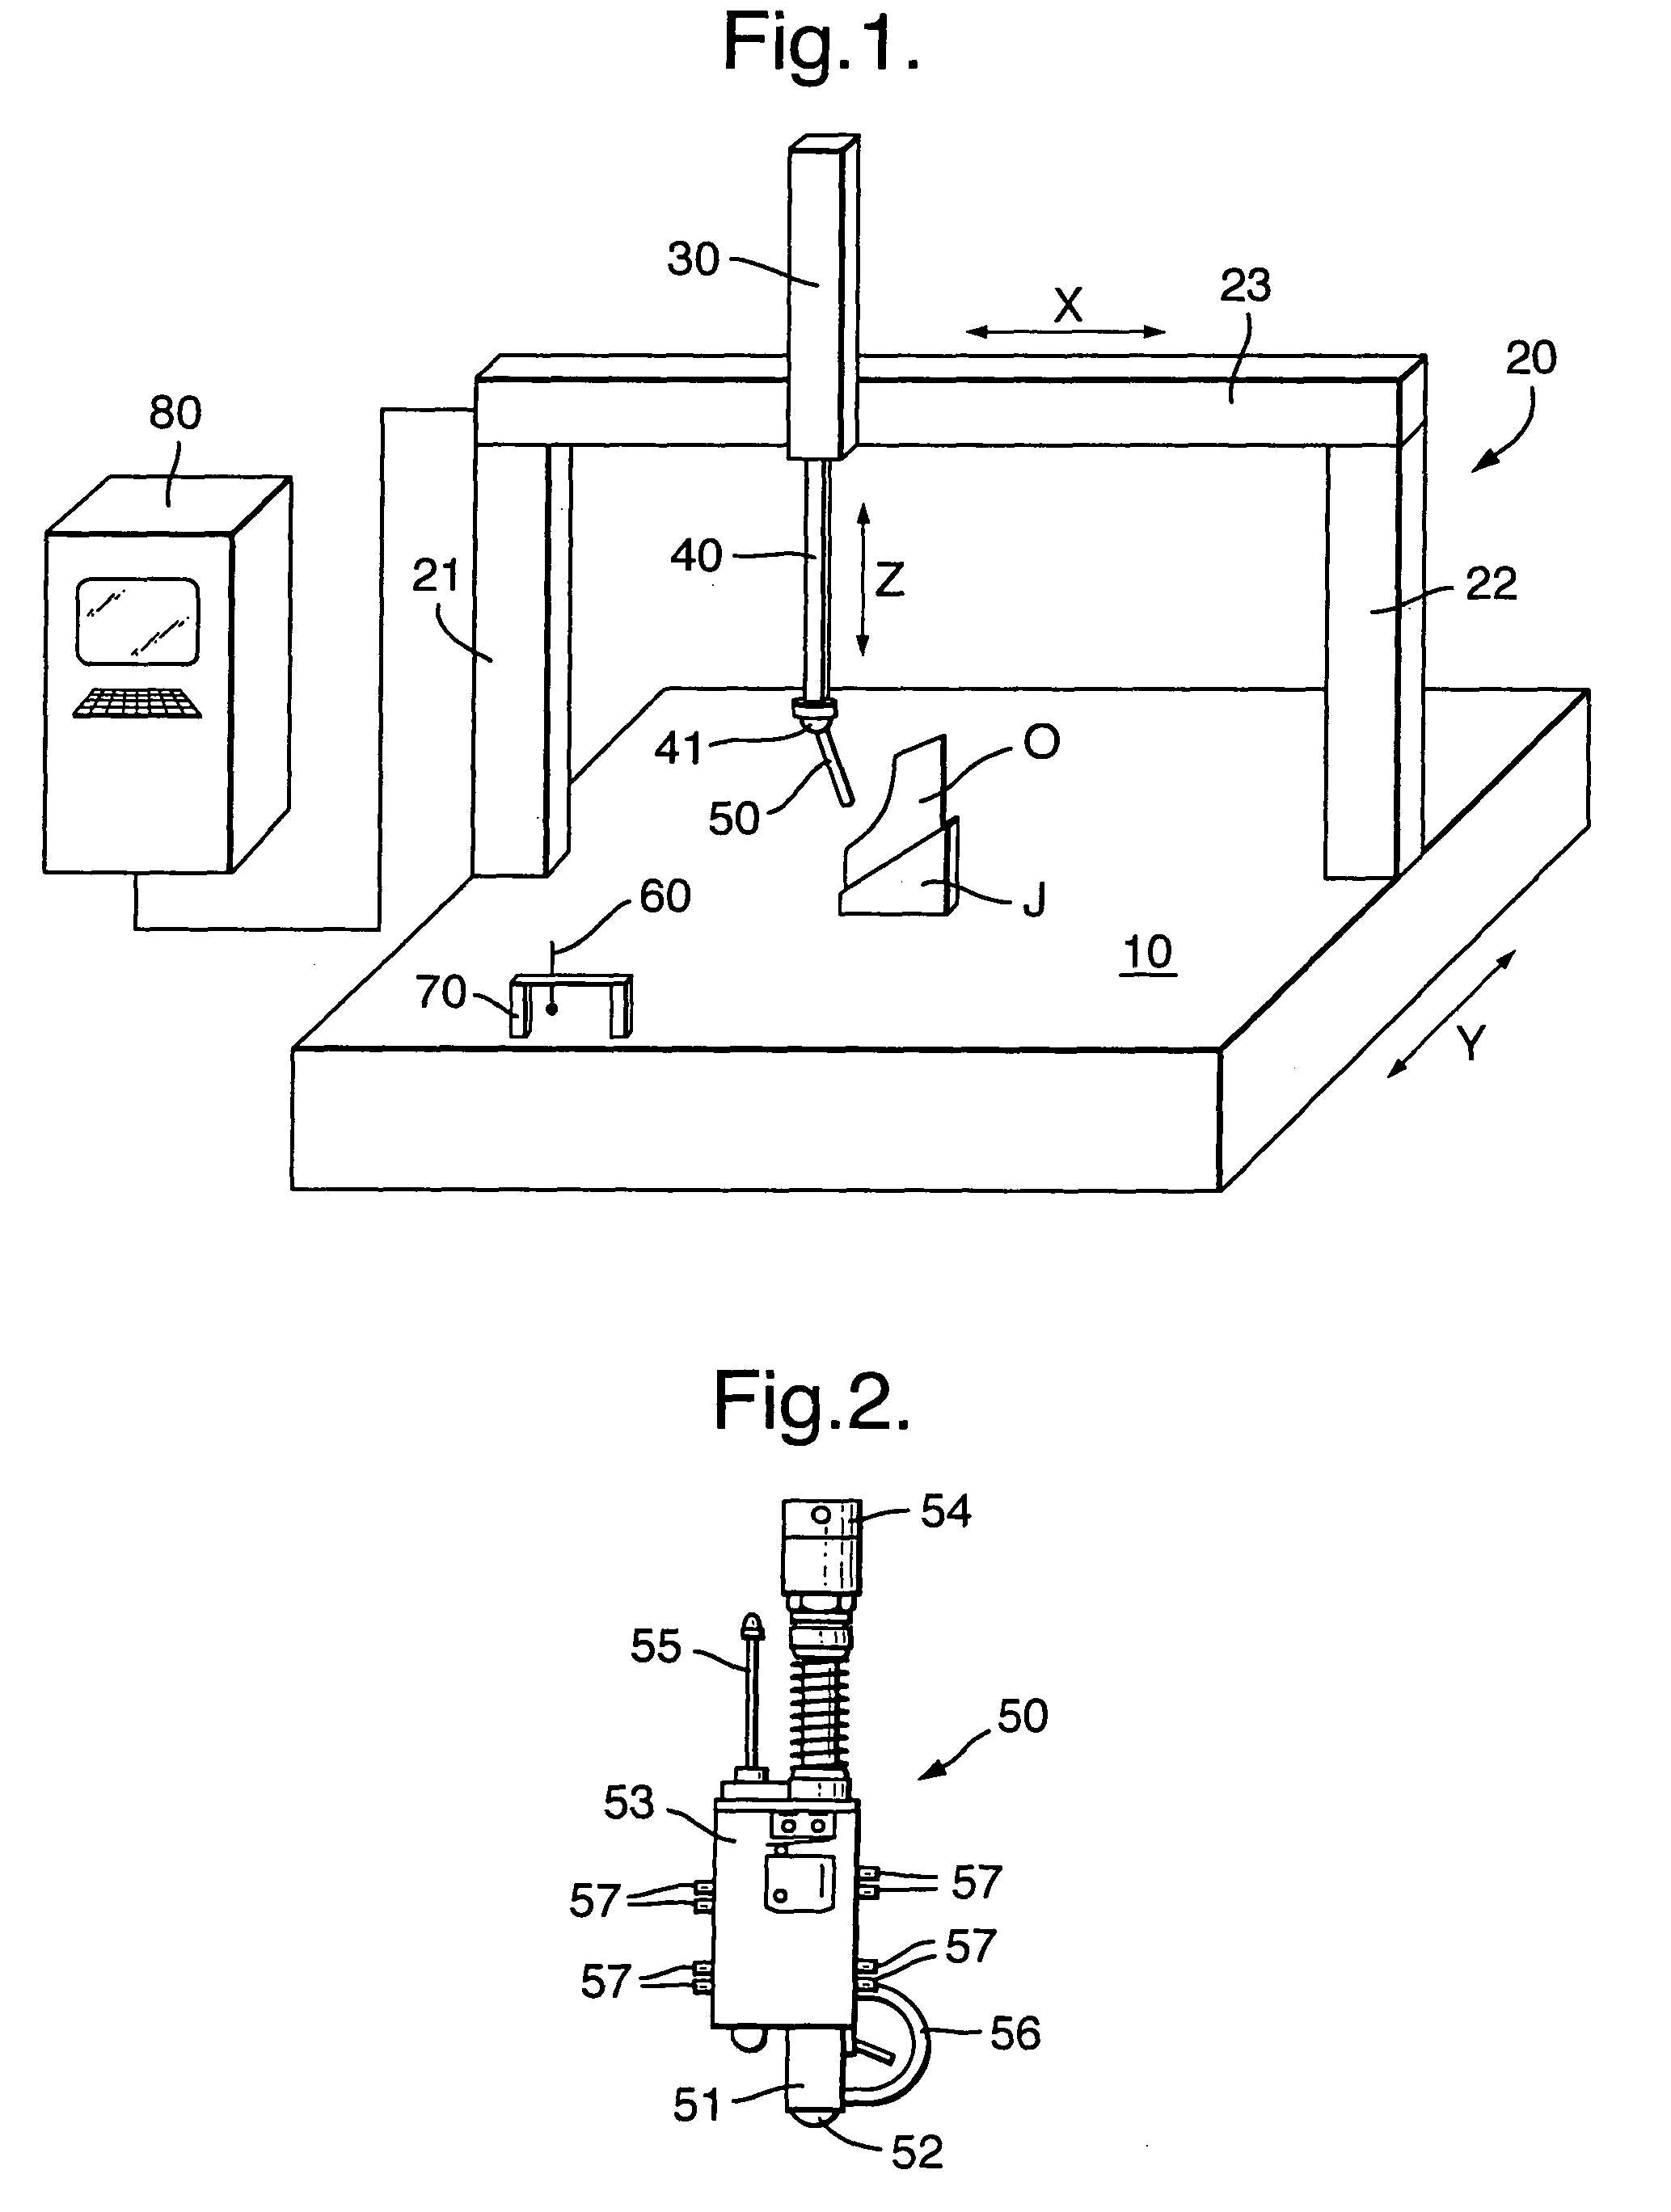 Apparatus for measuring wall thicknesses of objects